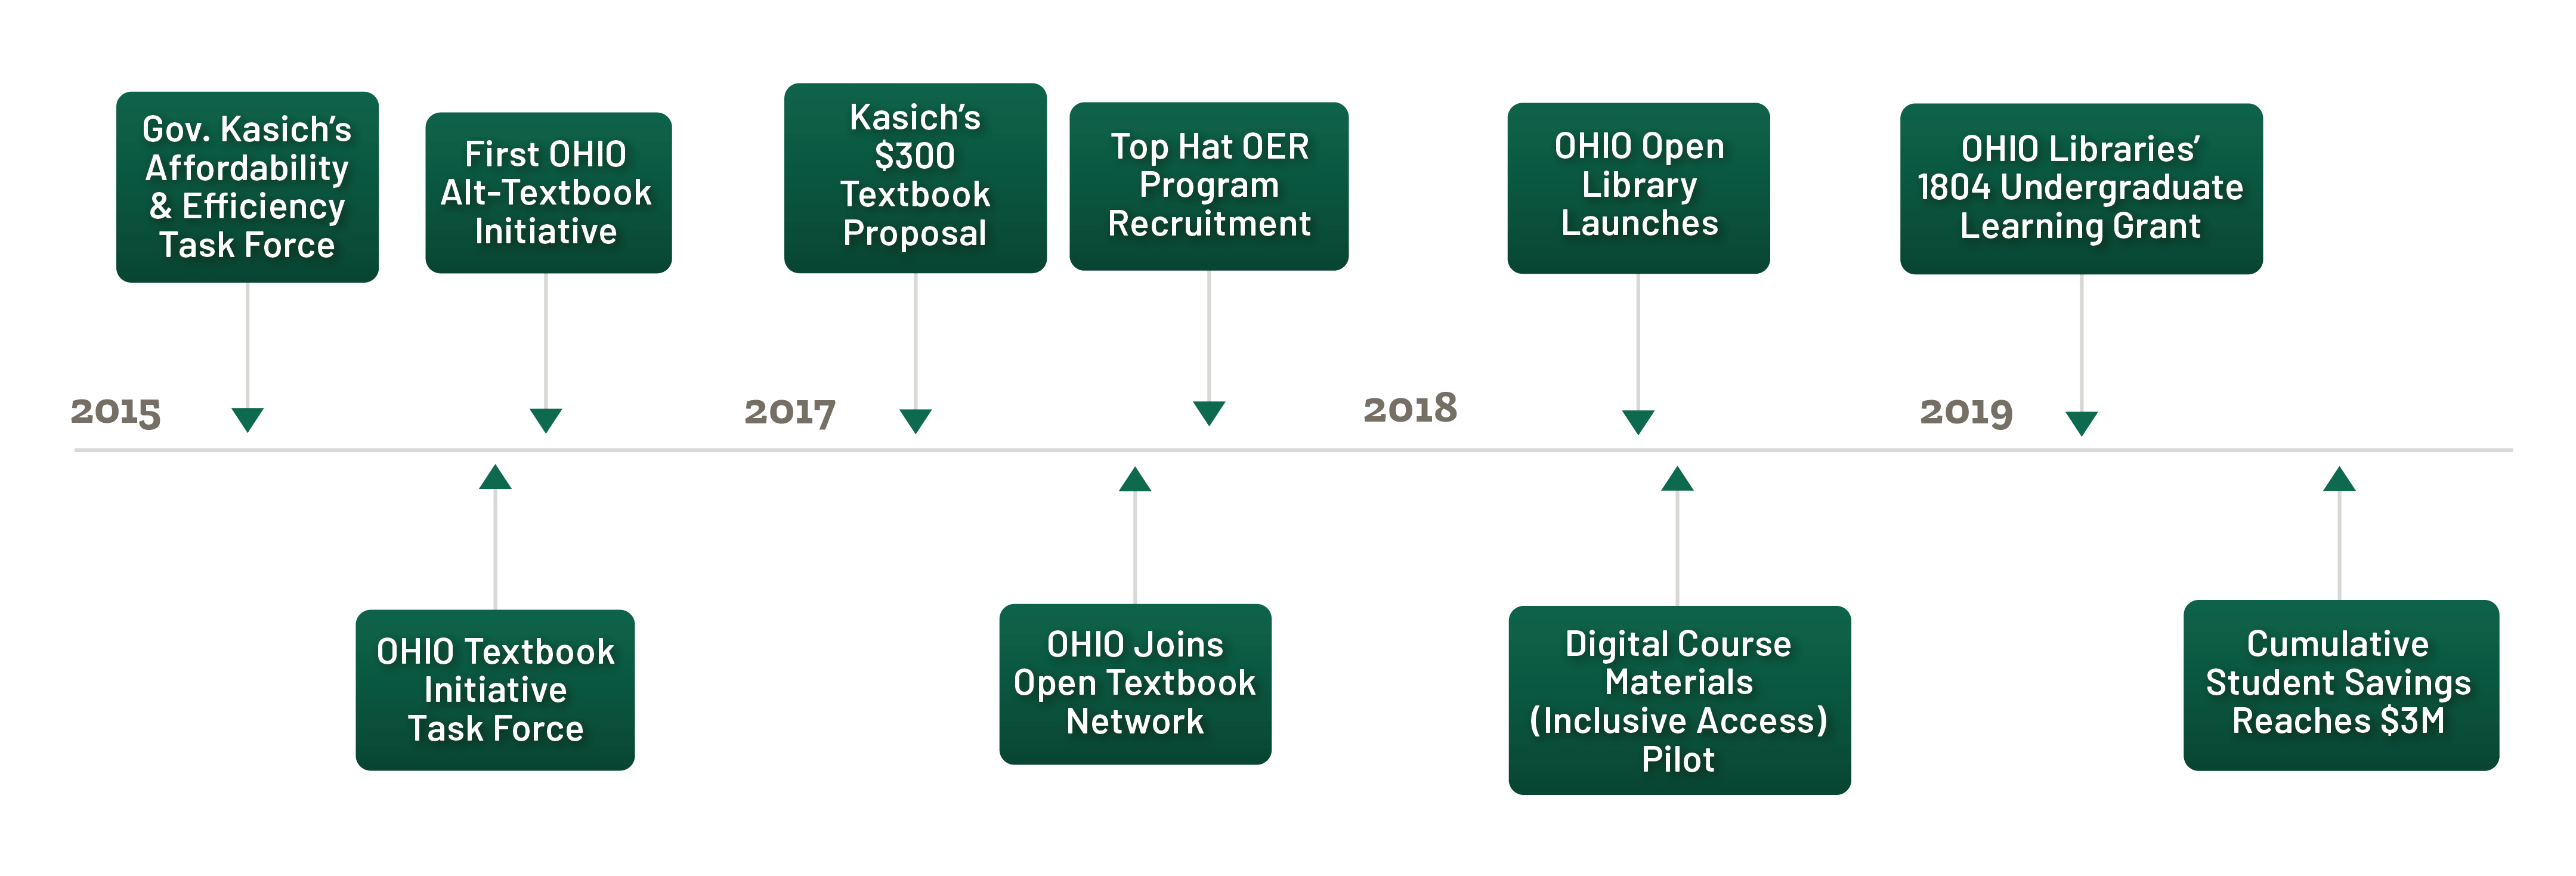 The history of affordable learning efforts across Ohio University. 2015: Gov. Kasich's Affordability & Efficiency Task Force, OHIO Textbook Initiative Task Force, and First OHIO Alt-Textbook Initiative; 2017: Kasich's $300 Textbook Proposal, OHIO joins the Open Textbook Network, and Top Hat OER program recruitment takes place; 2018: OHIO open library launches and digital course materials (inclusive access) pilot; 2019: OHIO Libraries' 1804 learning grant starts, and OHIO reaches total savings of $3 million.